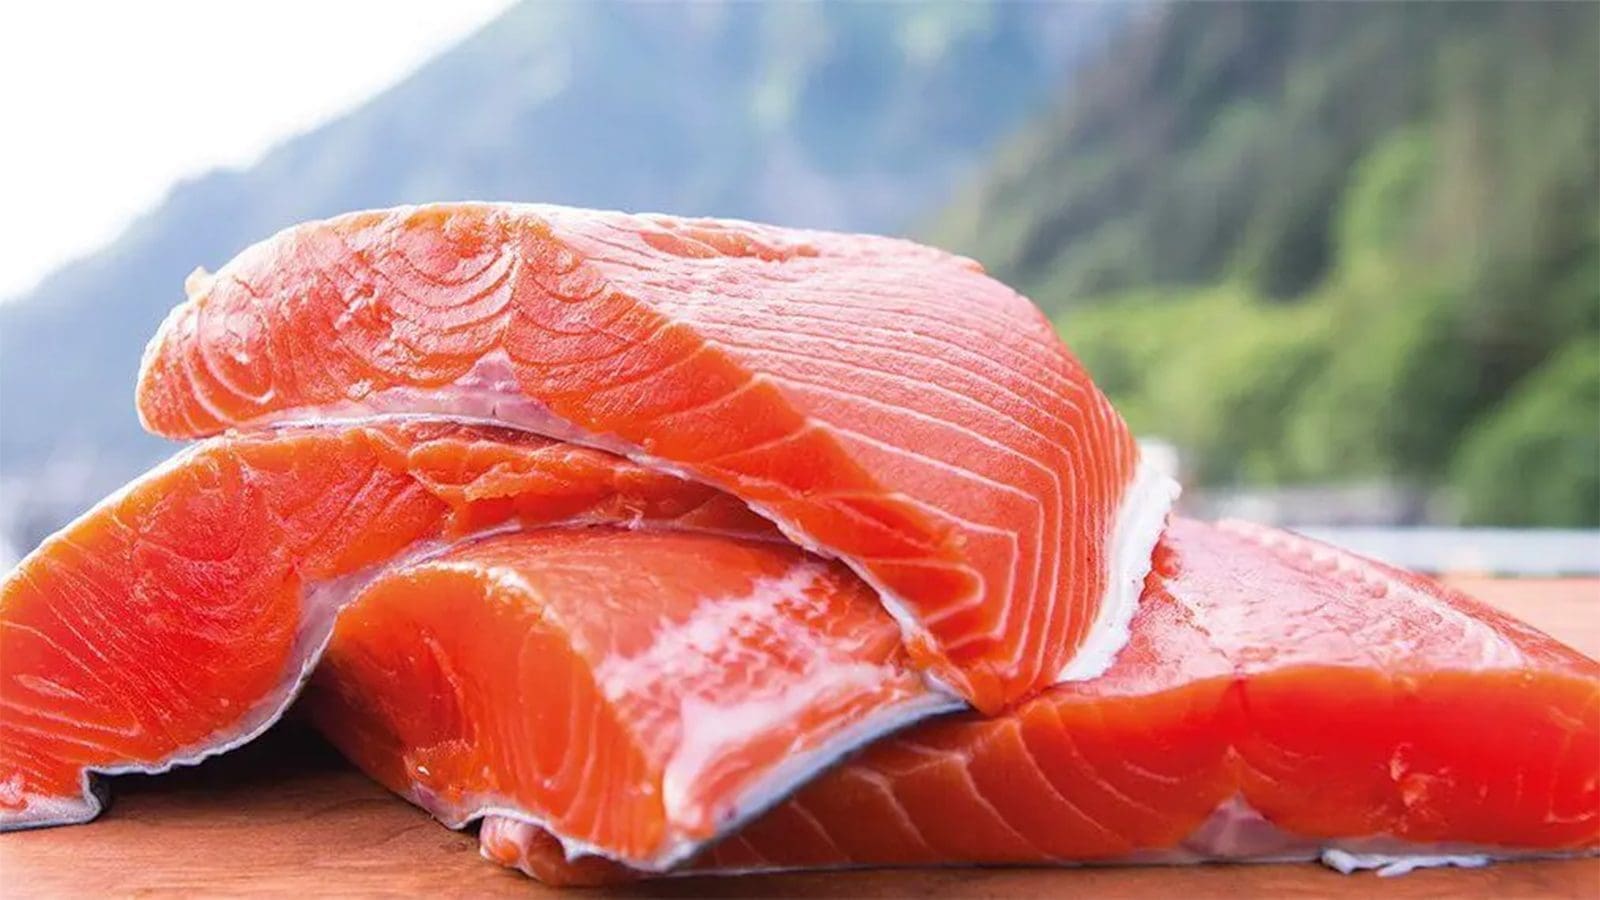 DSM launches tool to accurately measure colour of salmon fillet